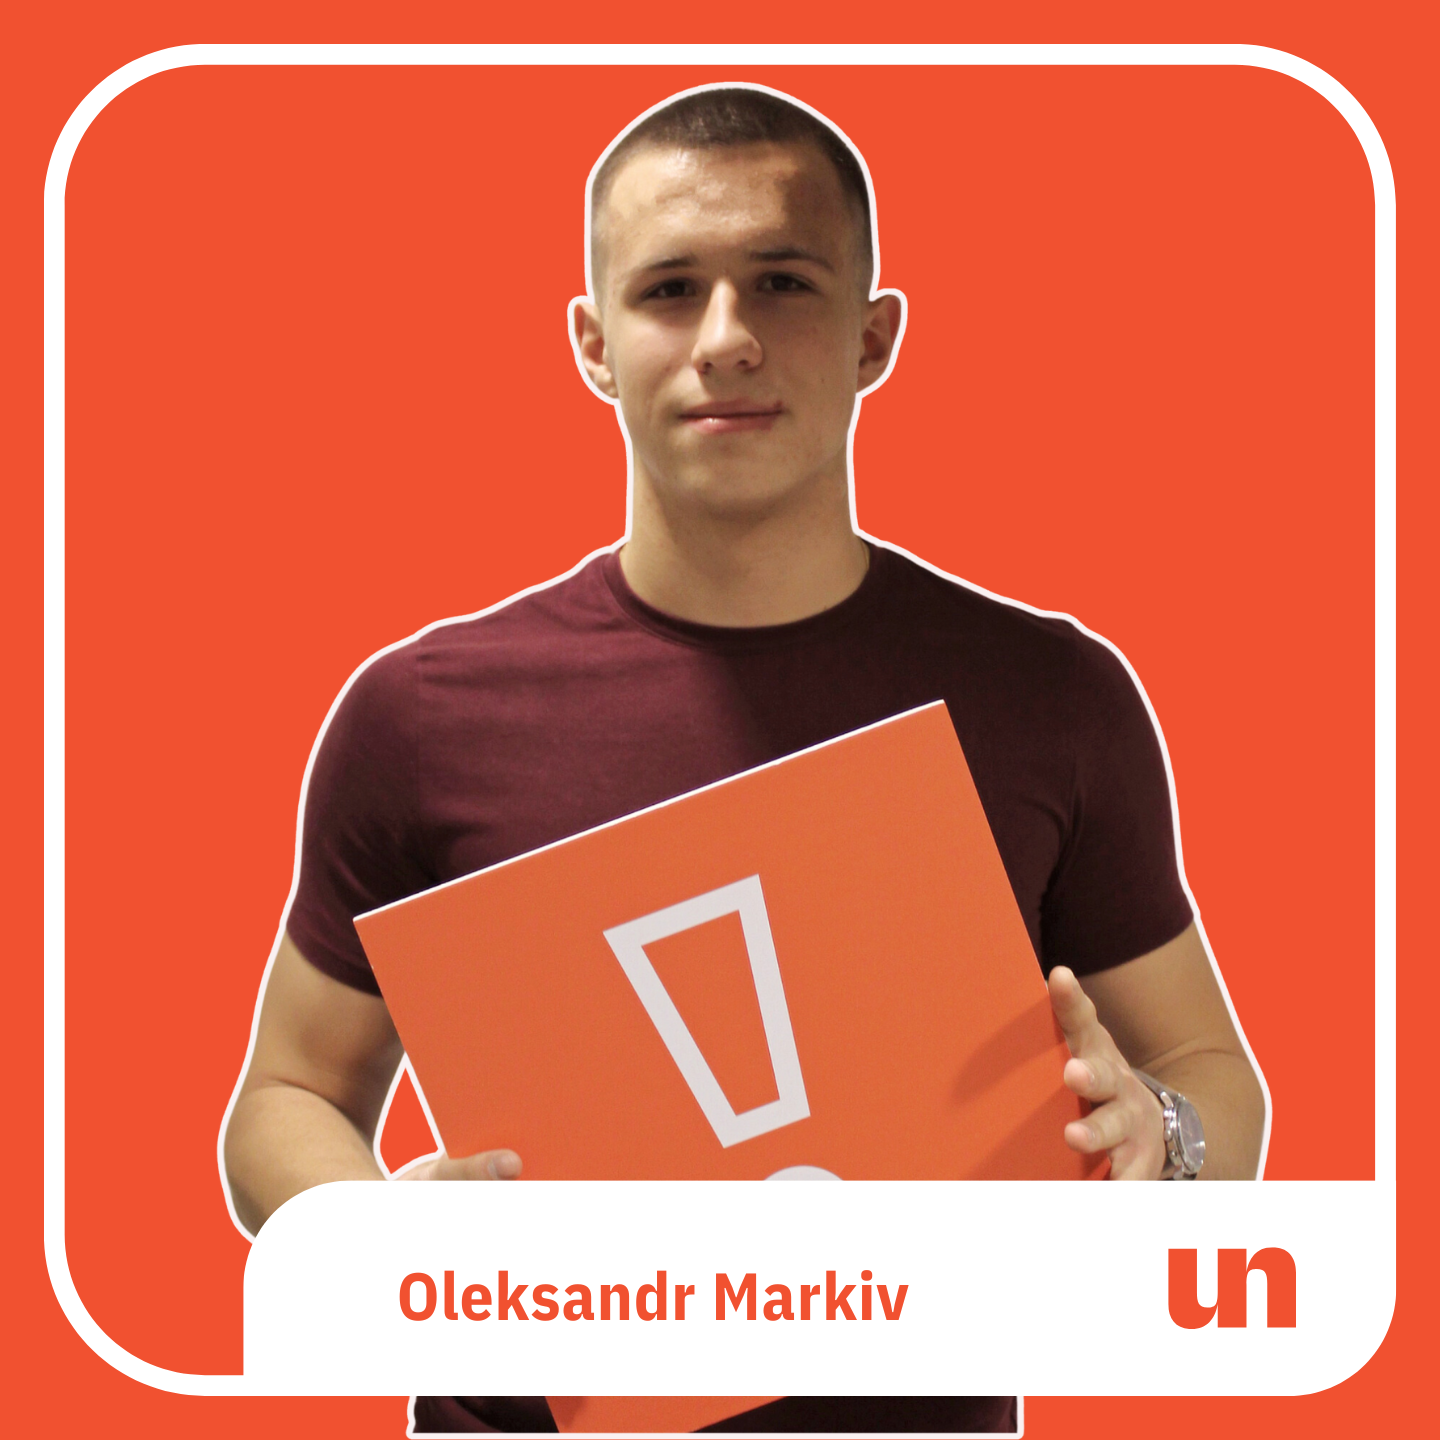 CLICK TO READ MORE ABOUT OLEKSANDR